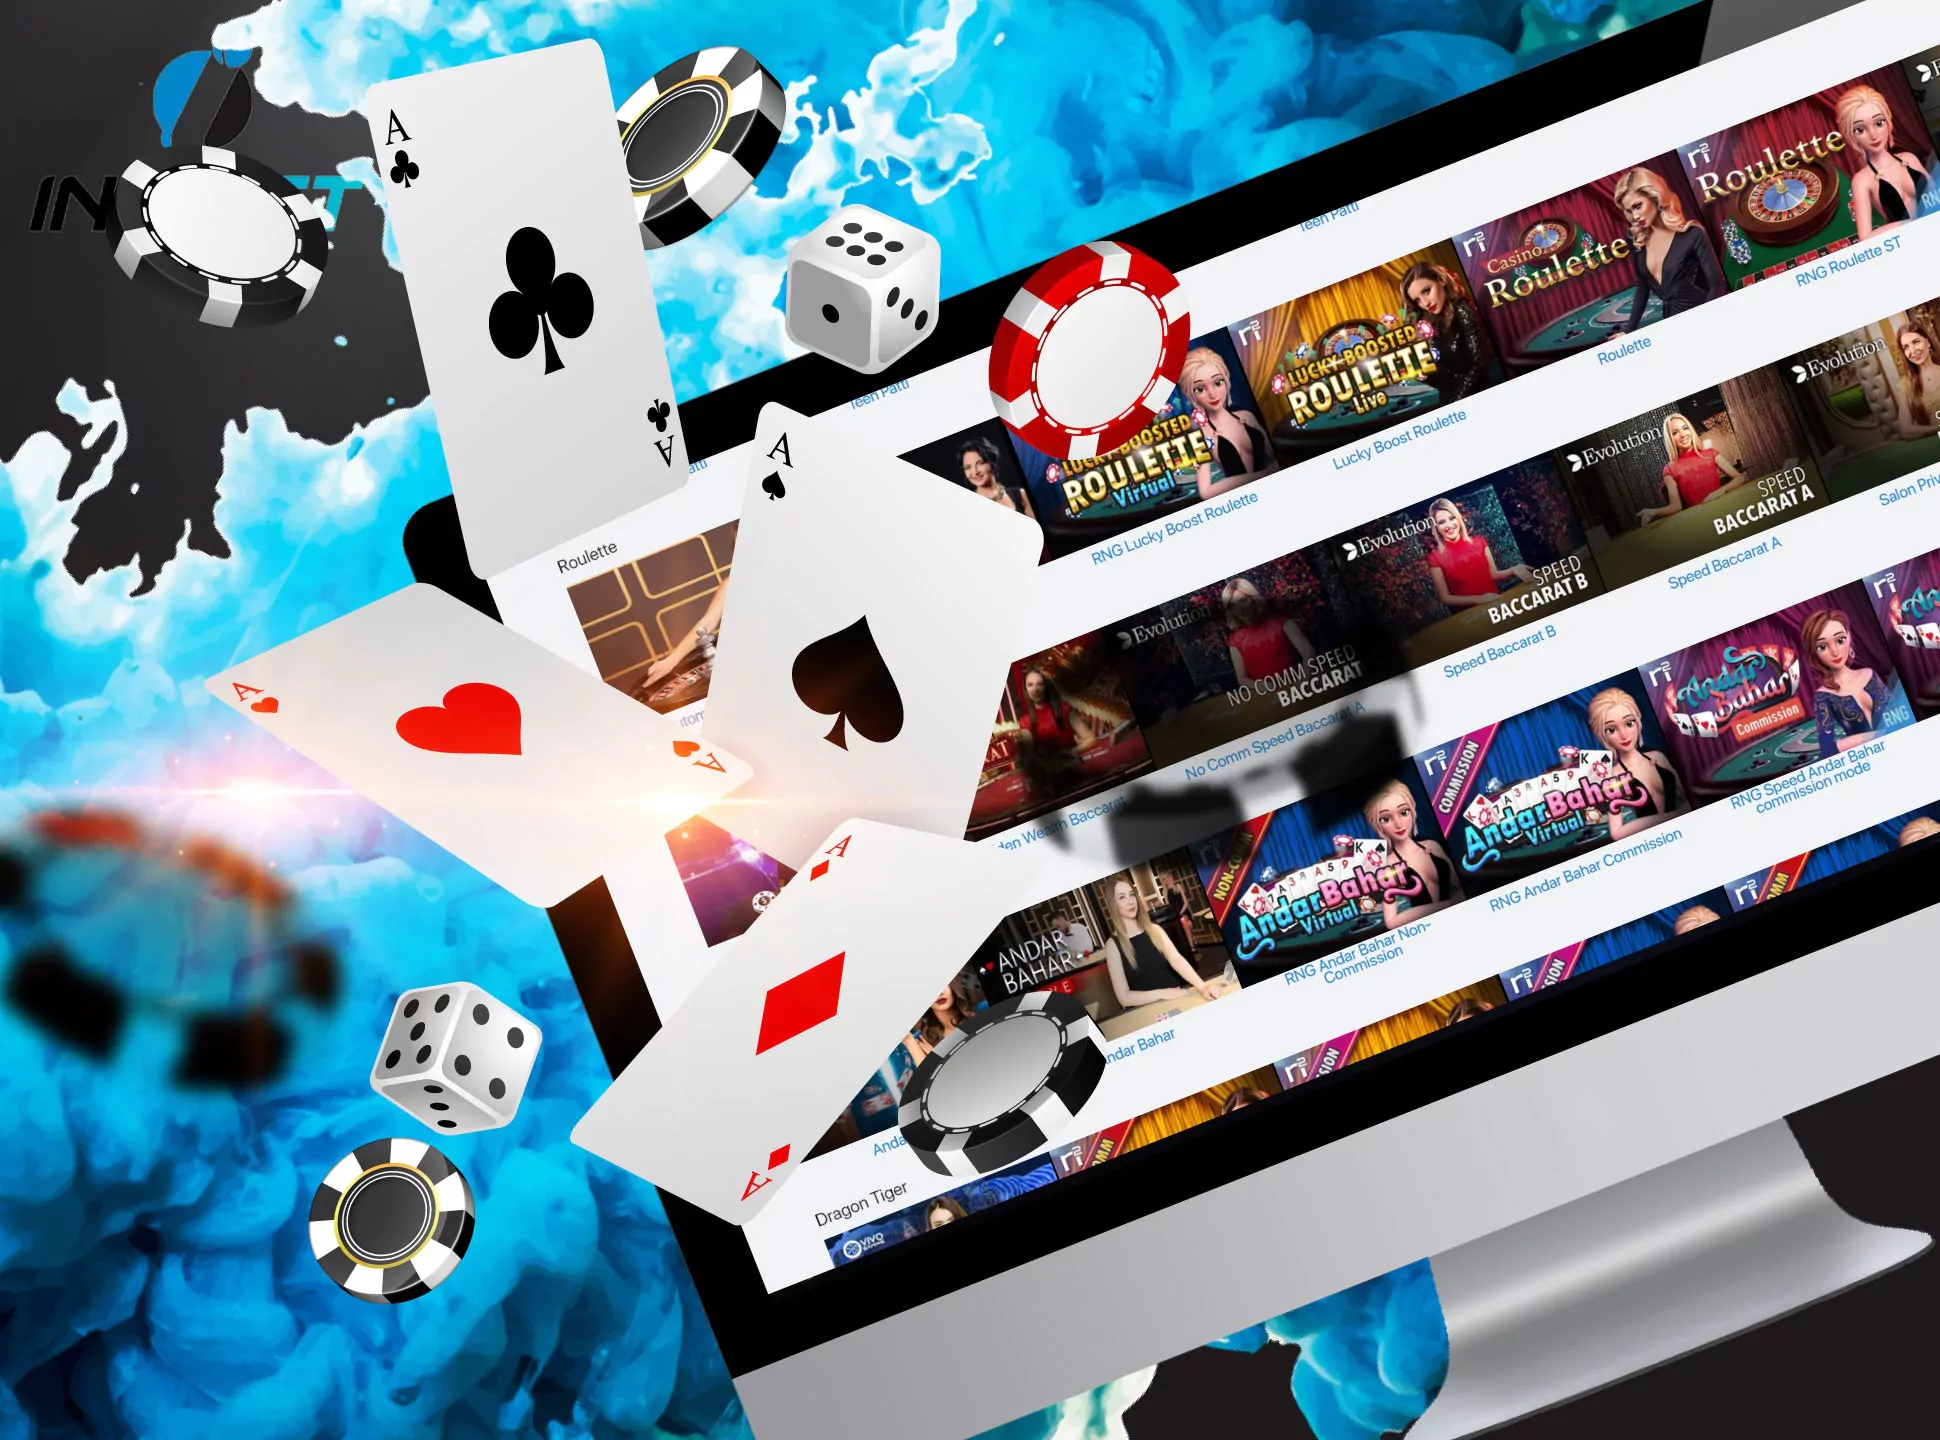 Play blackjack in live format with real people.